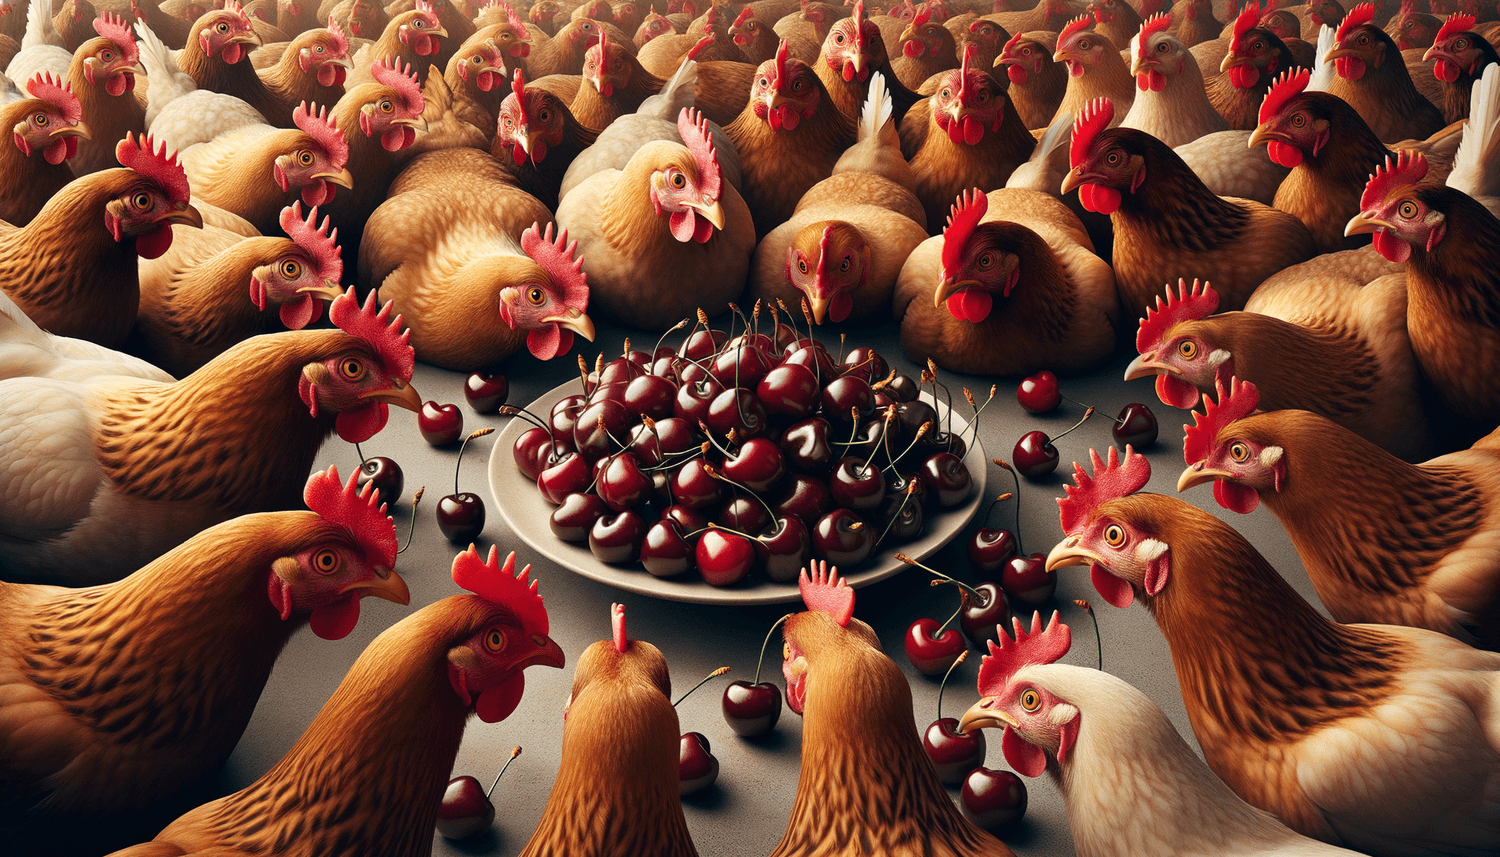 Can Chickens Eat Cherry Pits?